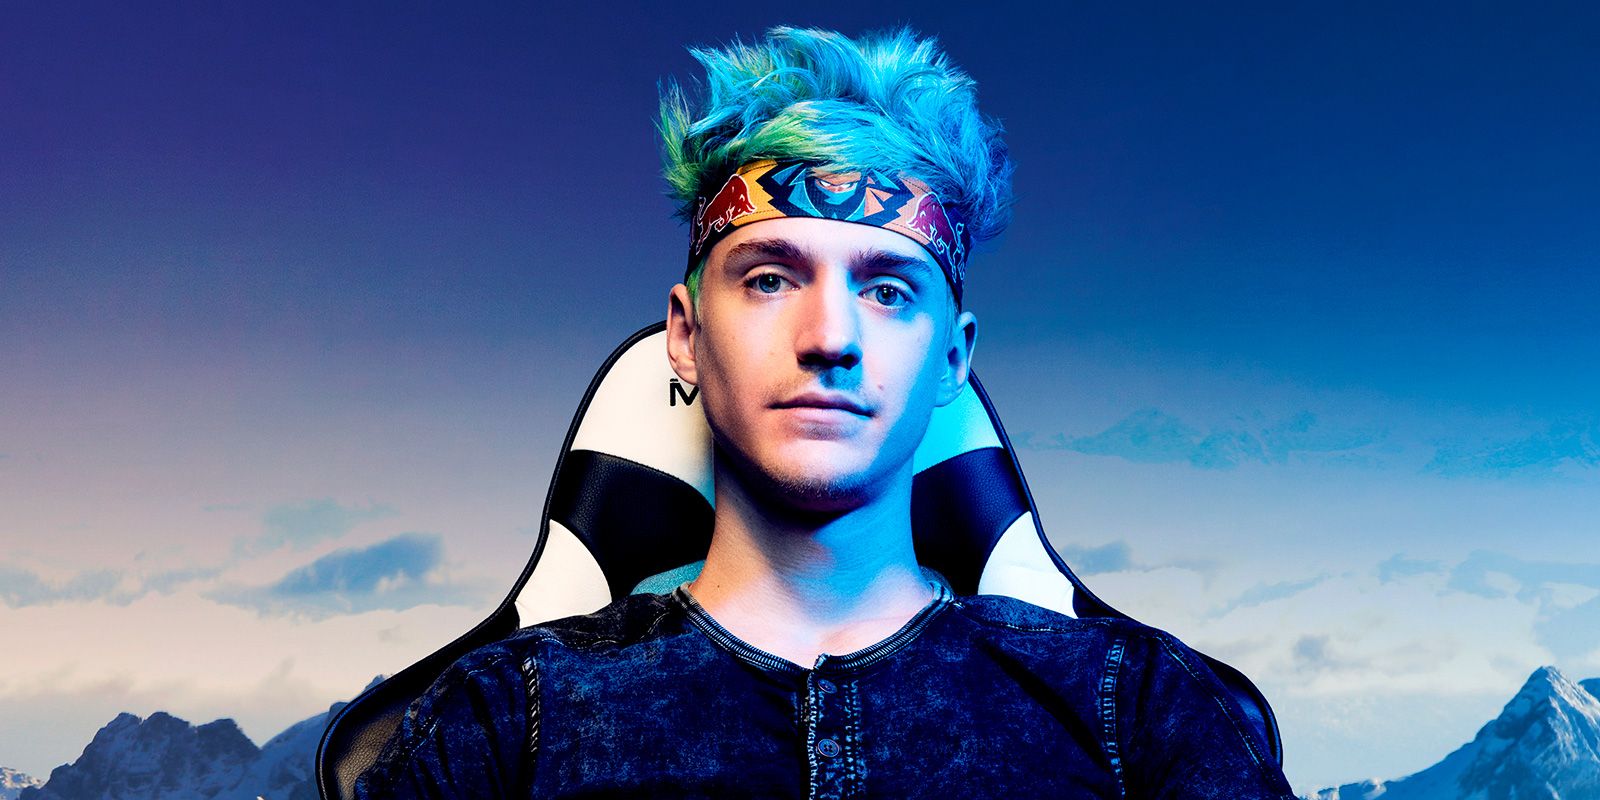 Twitch Uses Ninja’s Channel To Promote Other Streams